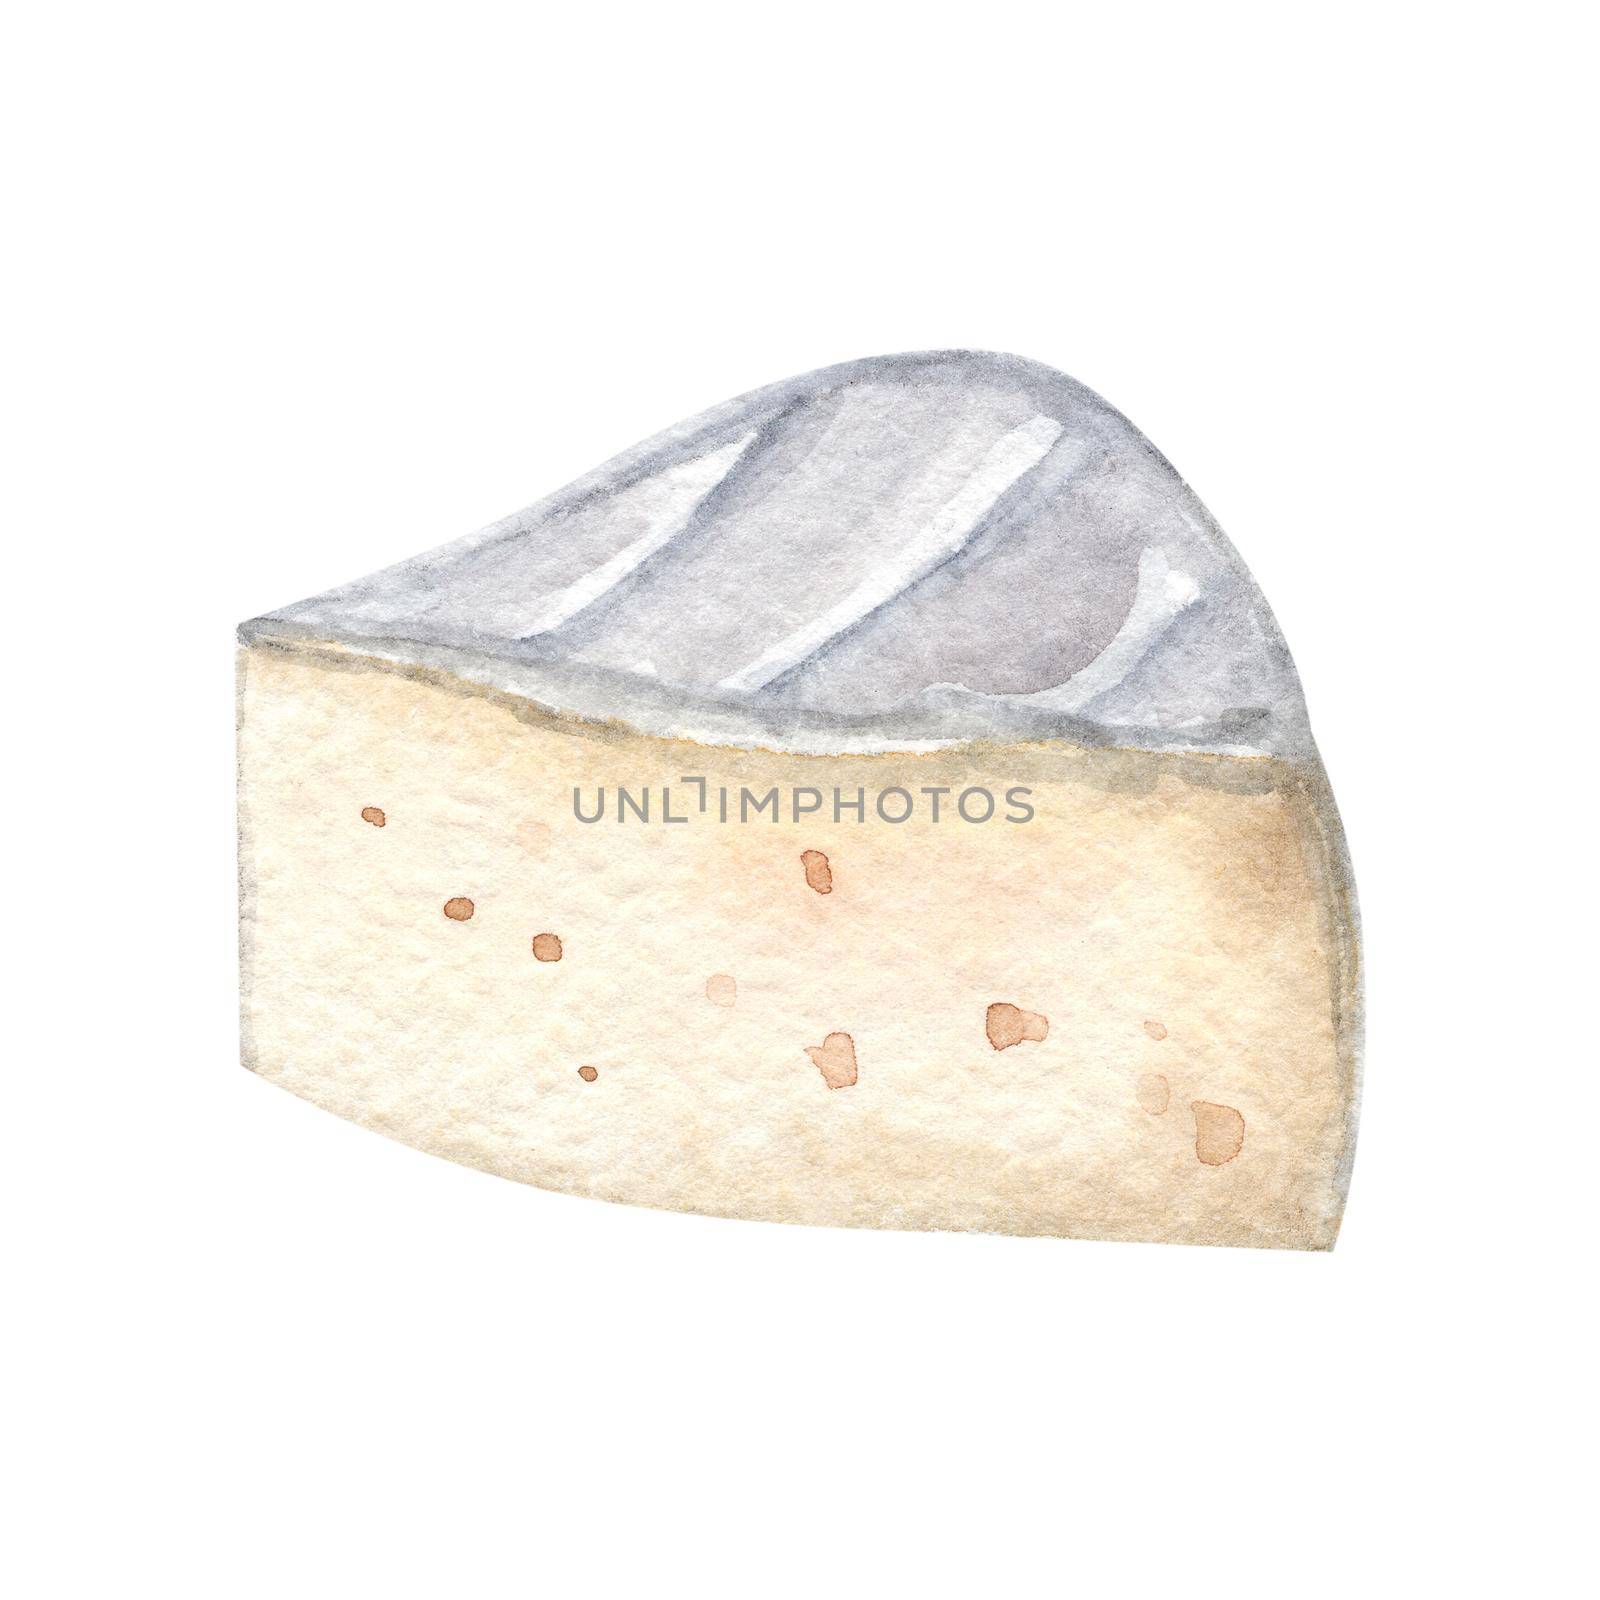 watercolor camembert piece cheese isolated on white . Hand drawn brie slice illustration by dreamloud